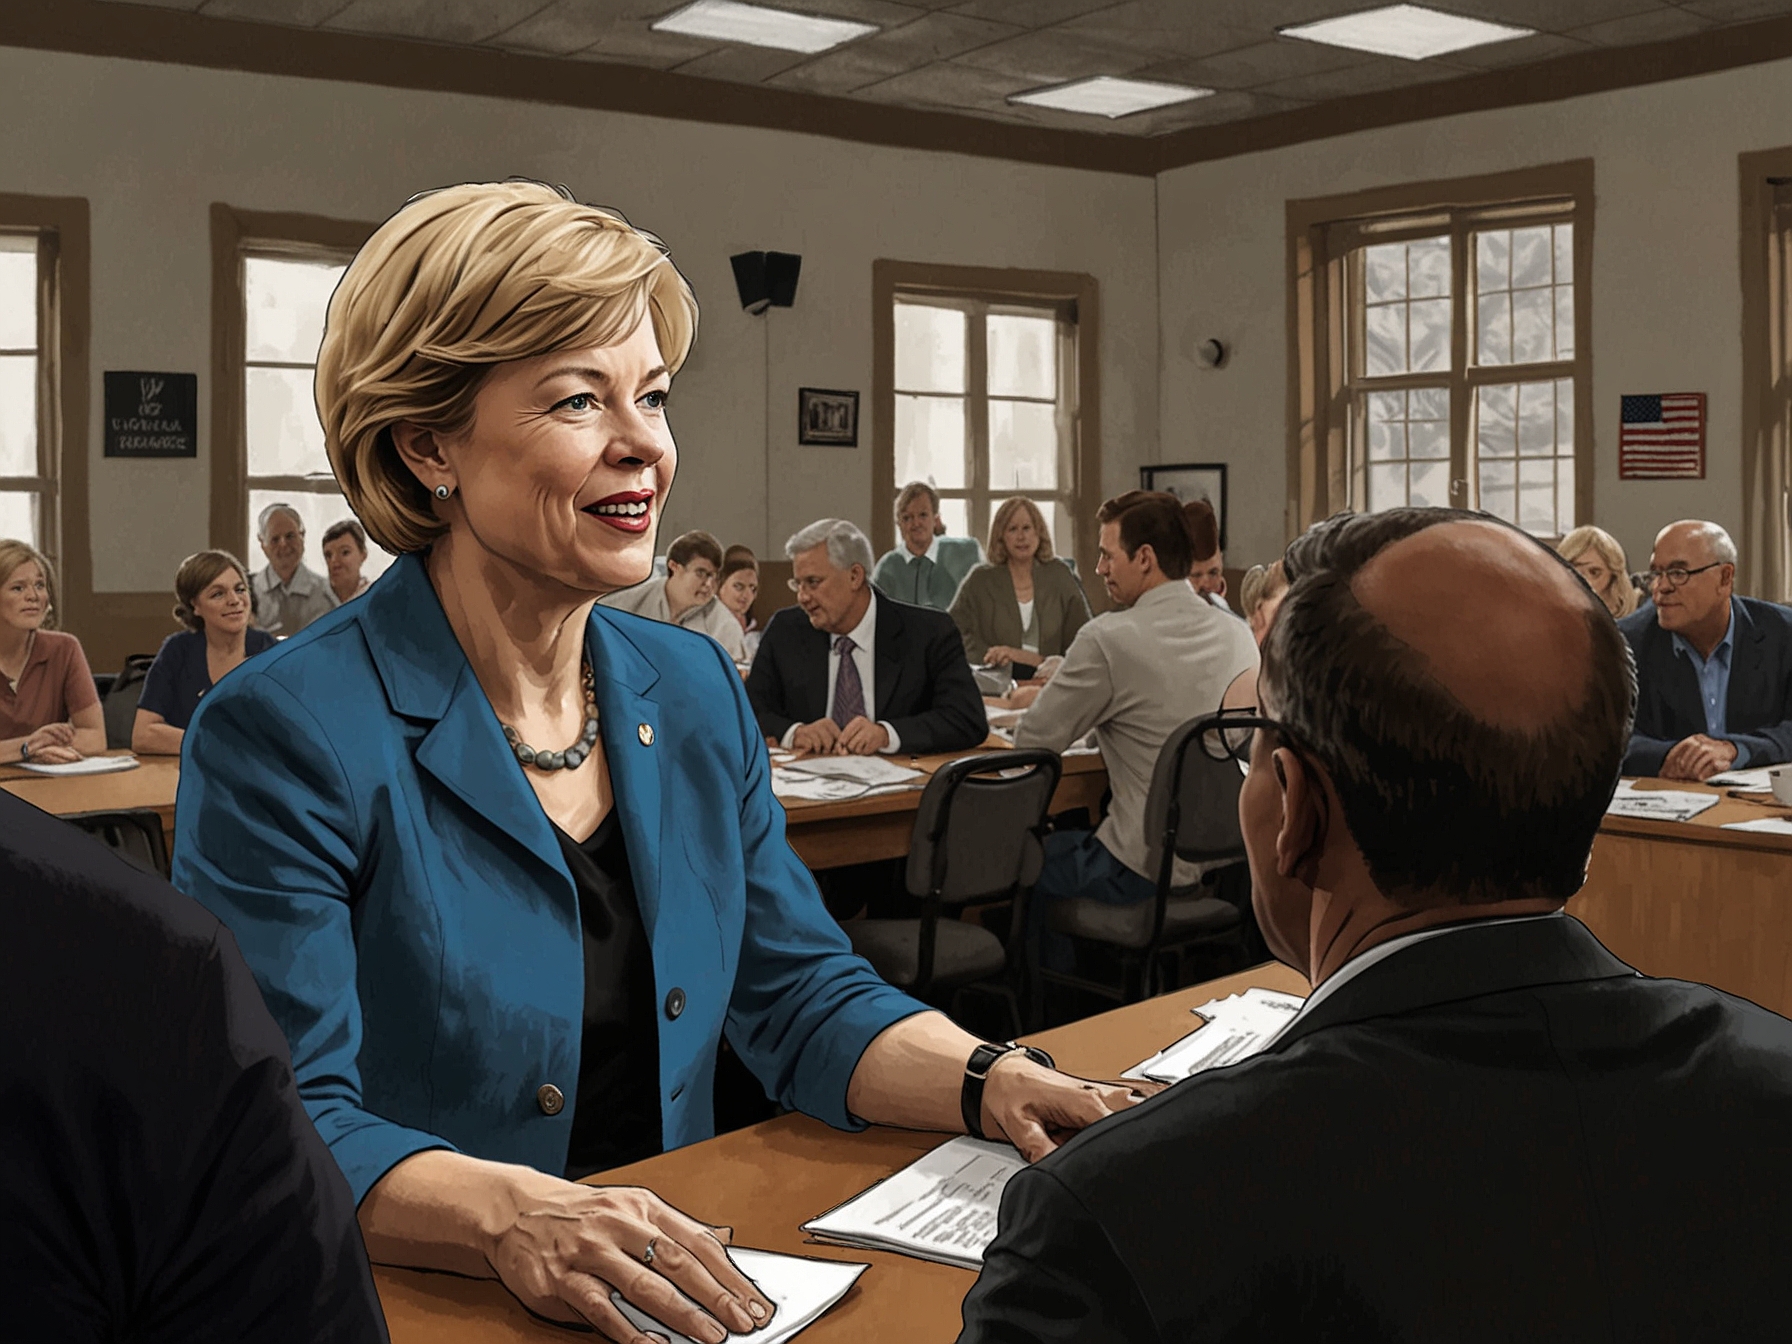 Tammy Baldwin engages with small business owners in a town hall meeting as part of her state tour, emphasizing her commitment to economic development and local constituency issues in Wisconsin.